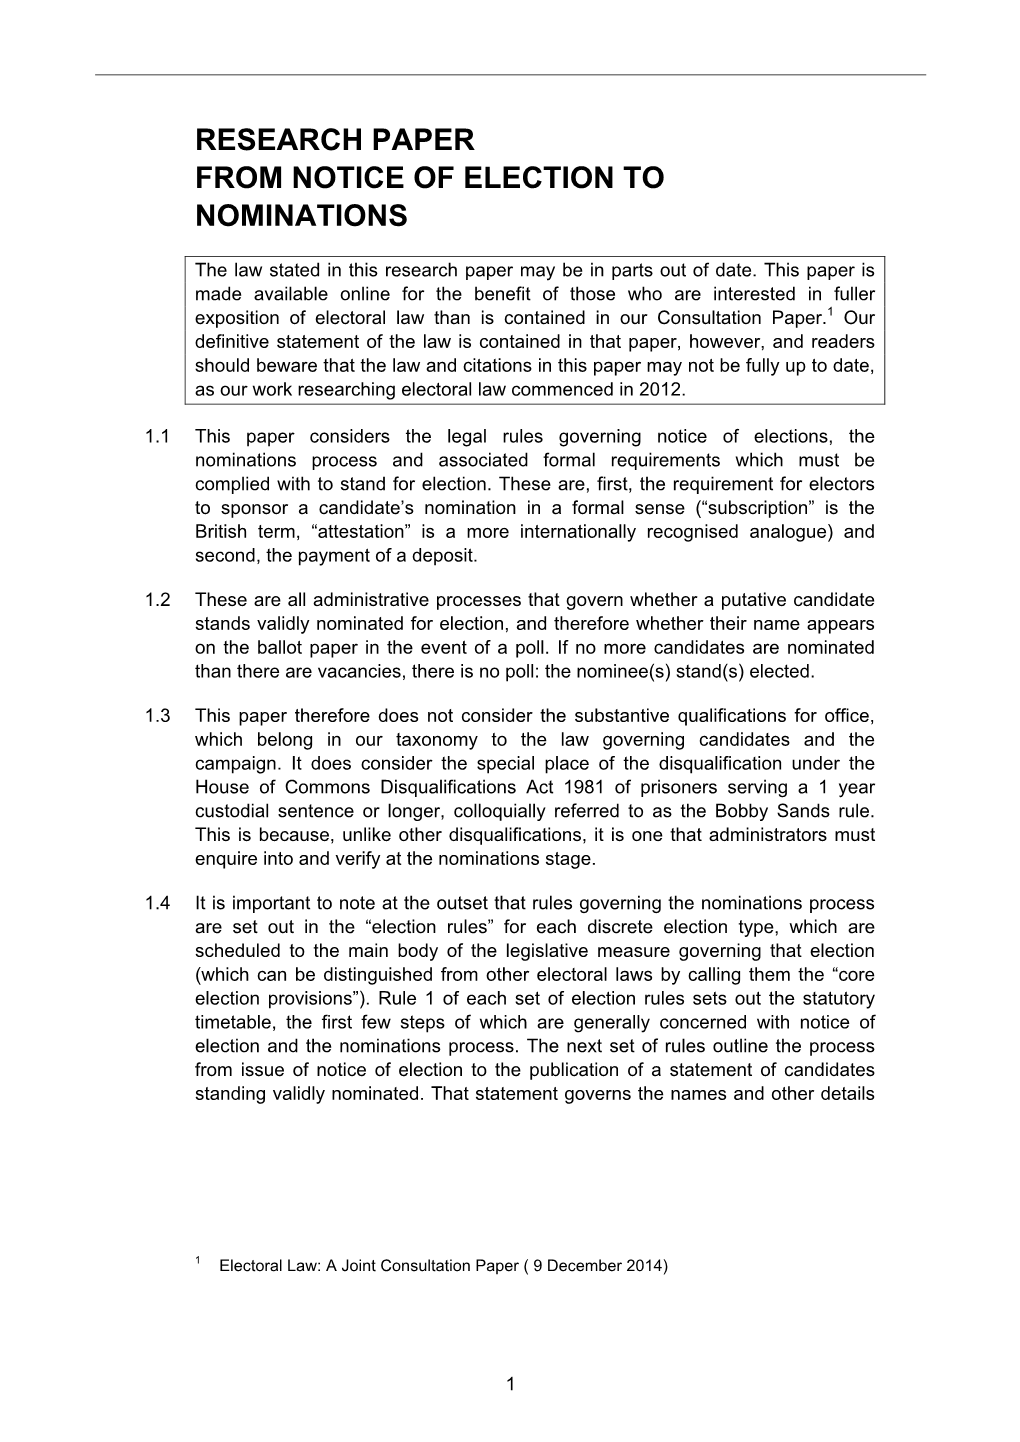 Research Paper from Notice of Election to Nominations